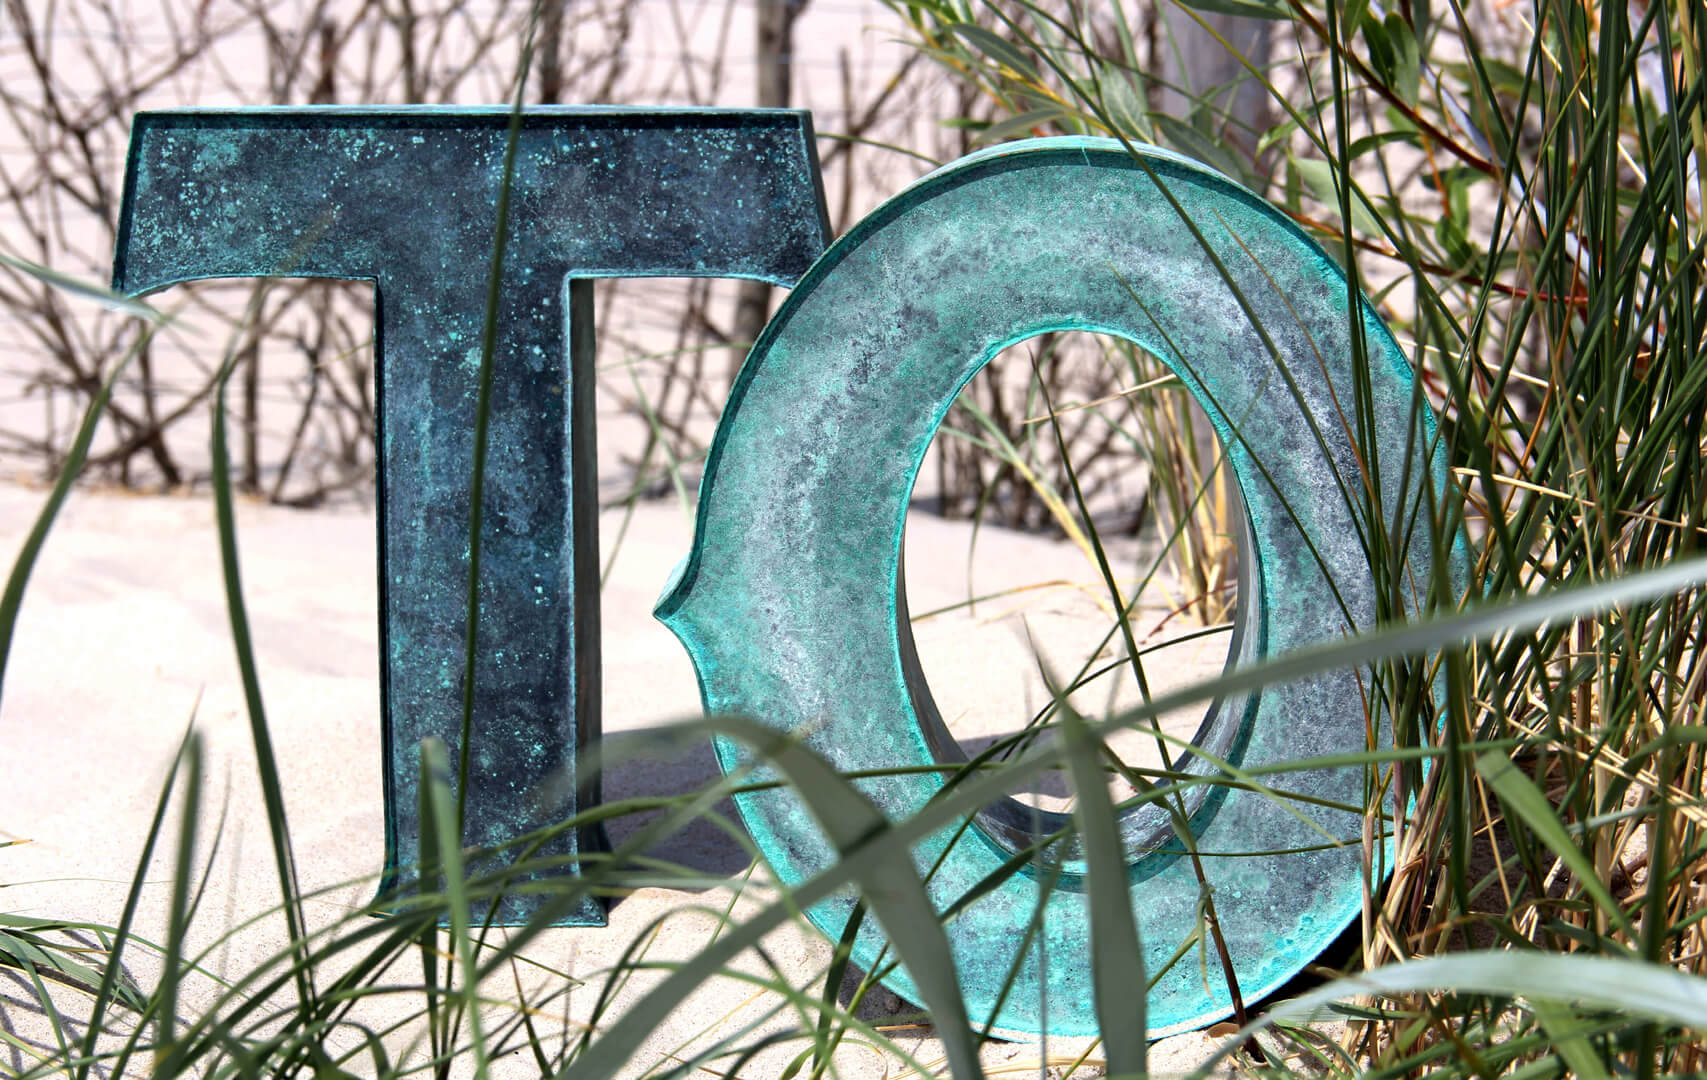 letters-metal-industrial-patina-letters-covered-patina-letters-letters-vintage-letters-metal-rusted-letters-green-letters-letters-on-plaza-letters-space-letters-se-steel-rusted-letters